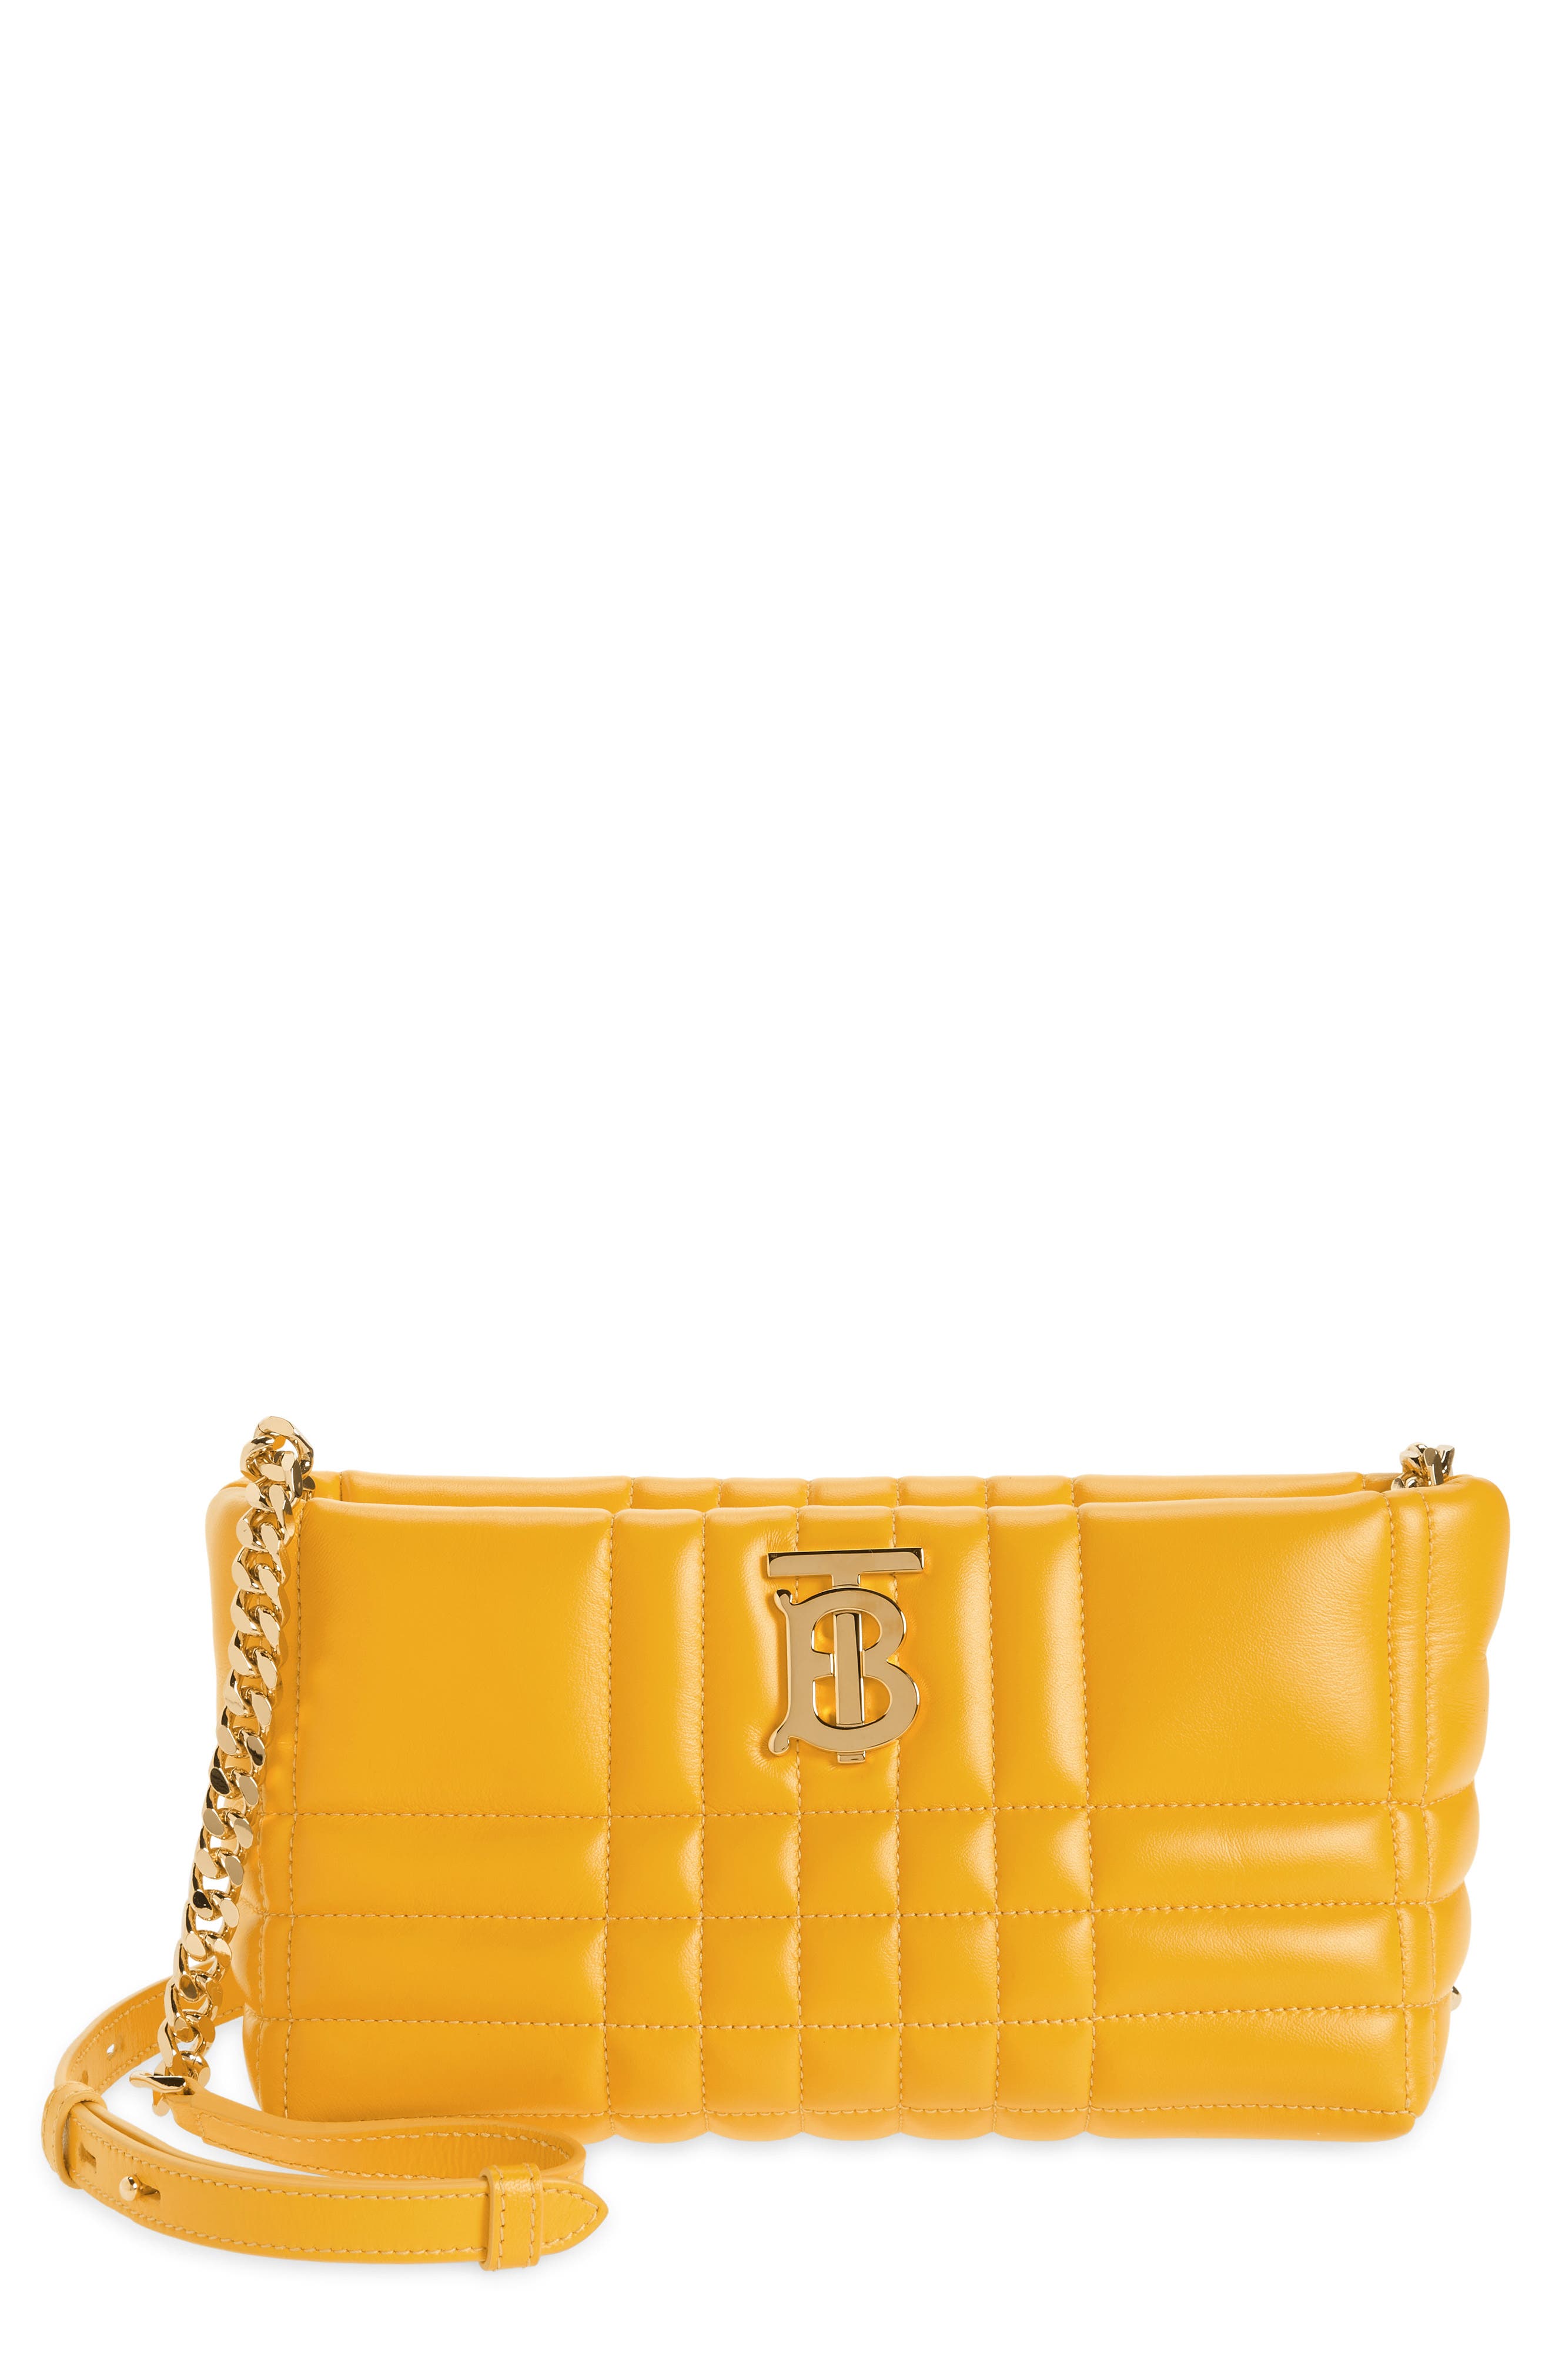 Burberry Small Lola Check Quilted Leather Crossbody Bag in Deep Saffron at Nordstrom